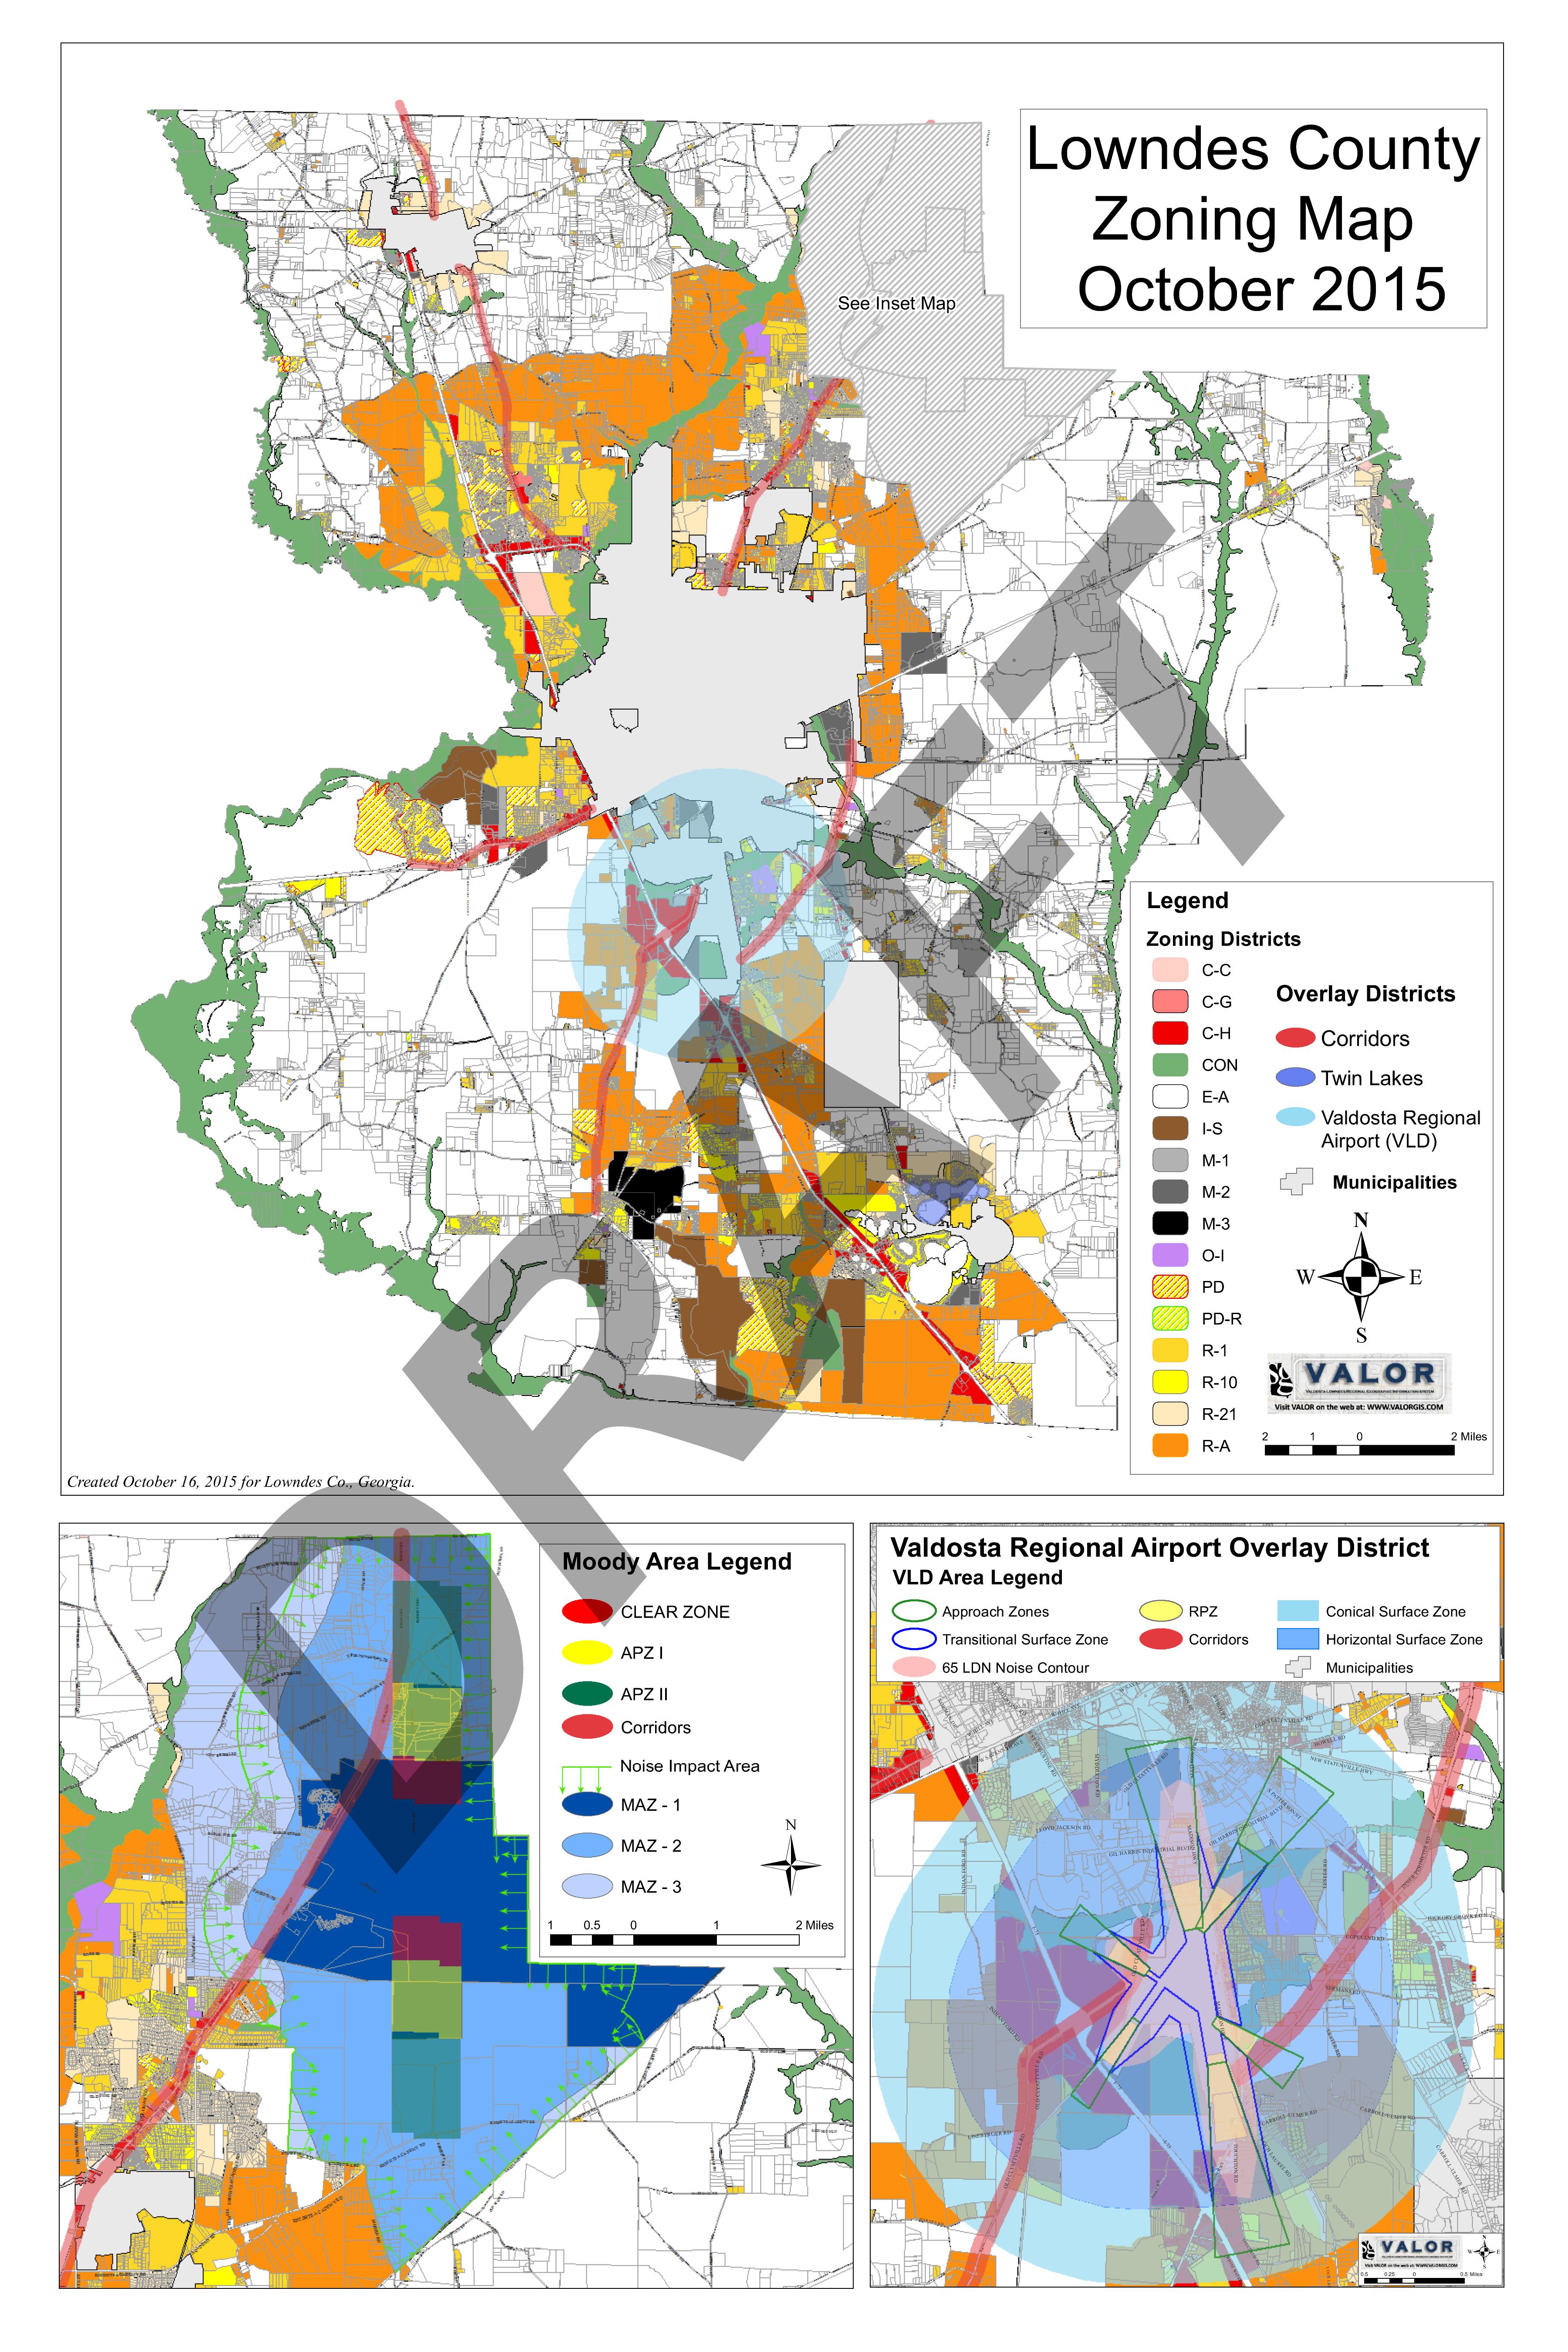 Lowndes County Zoning Map October 2015